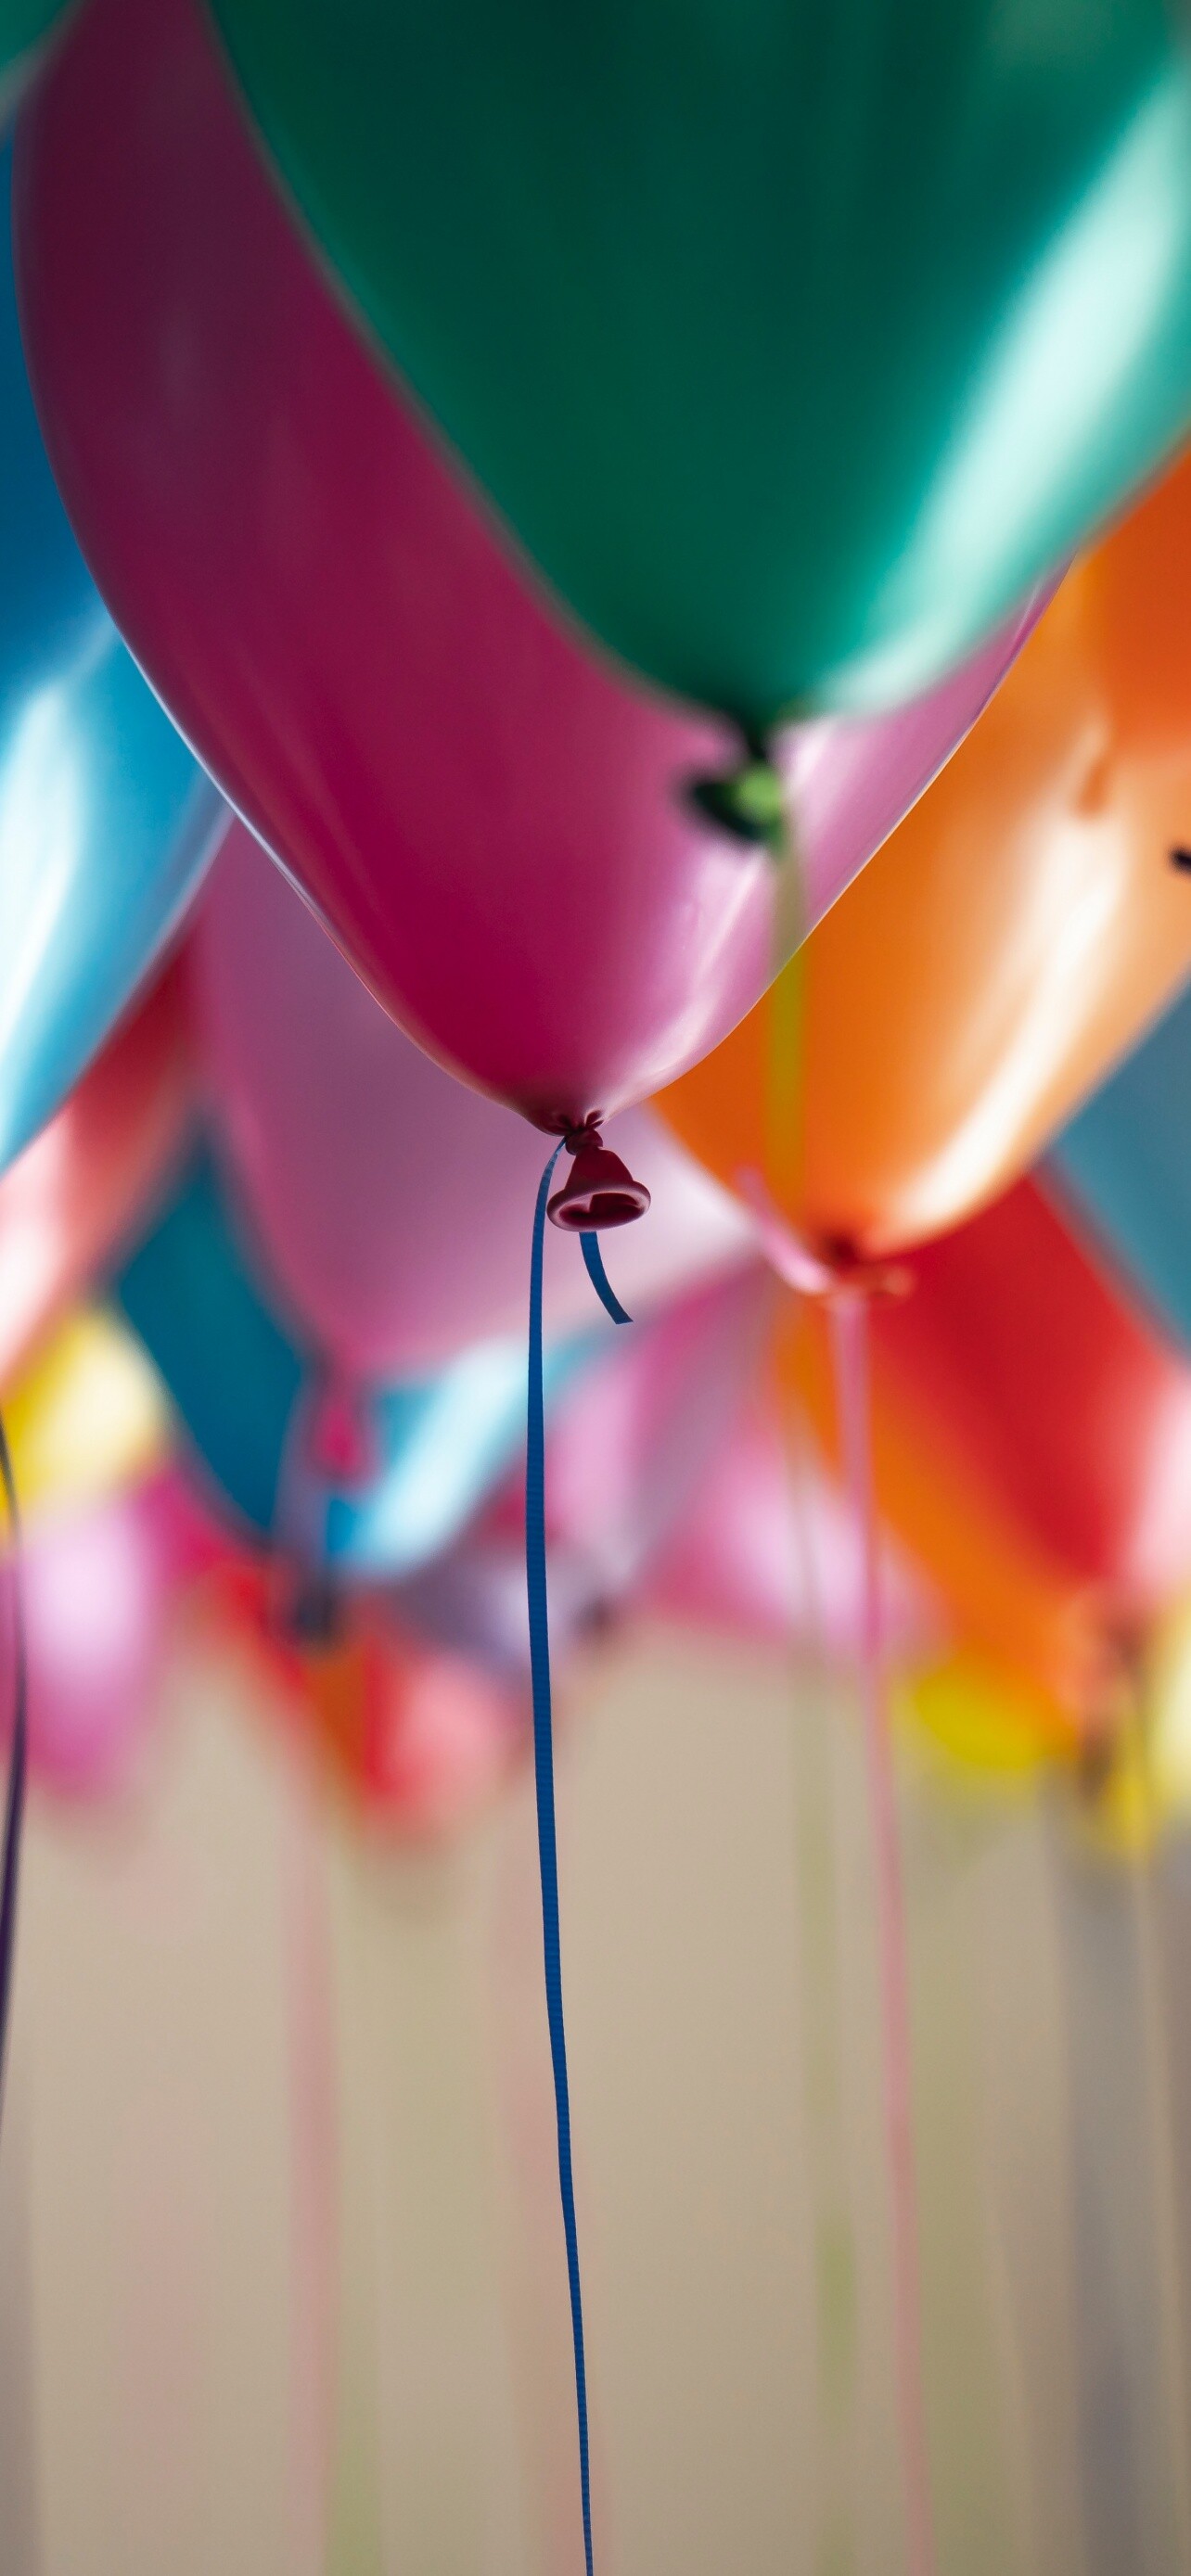 Balloons: Colorful, Birthday party, Decoration, A flexible bag that can be inflated with a gas. 1290x2780 HD Background.